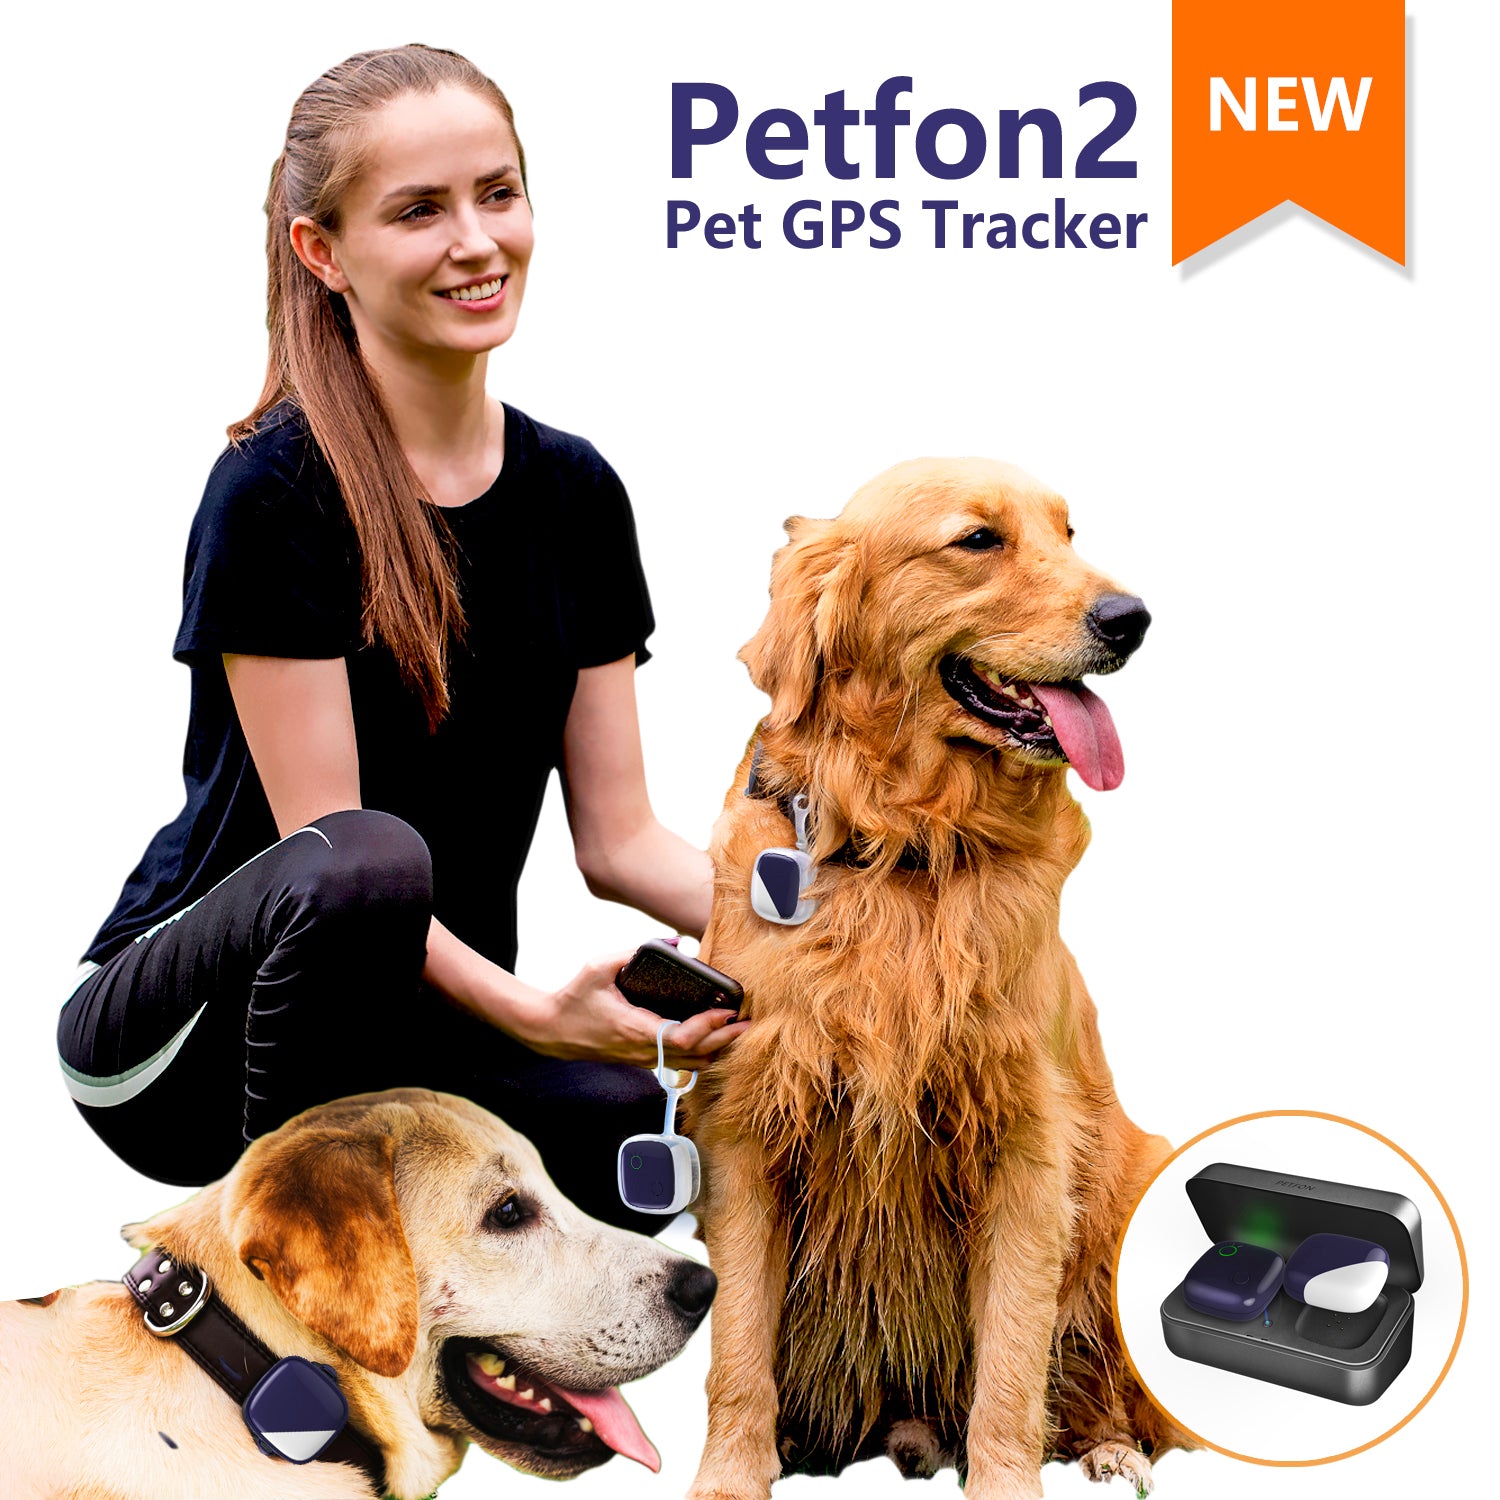 Dog GPS & Health tracking, $19/month